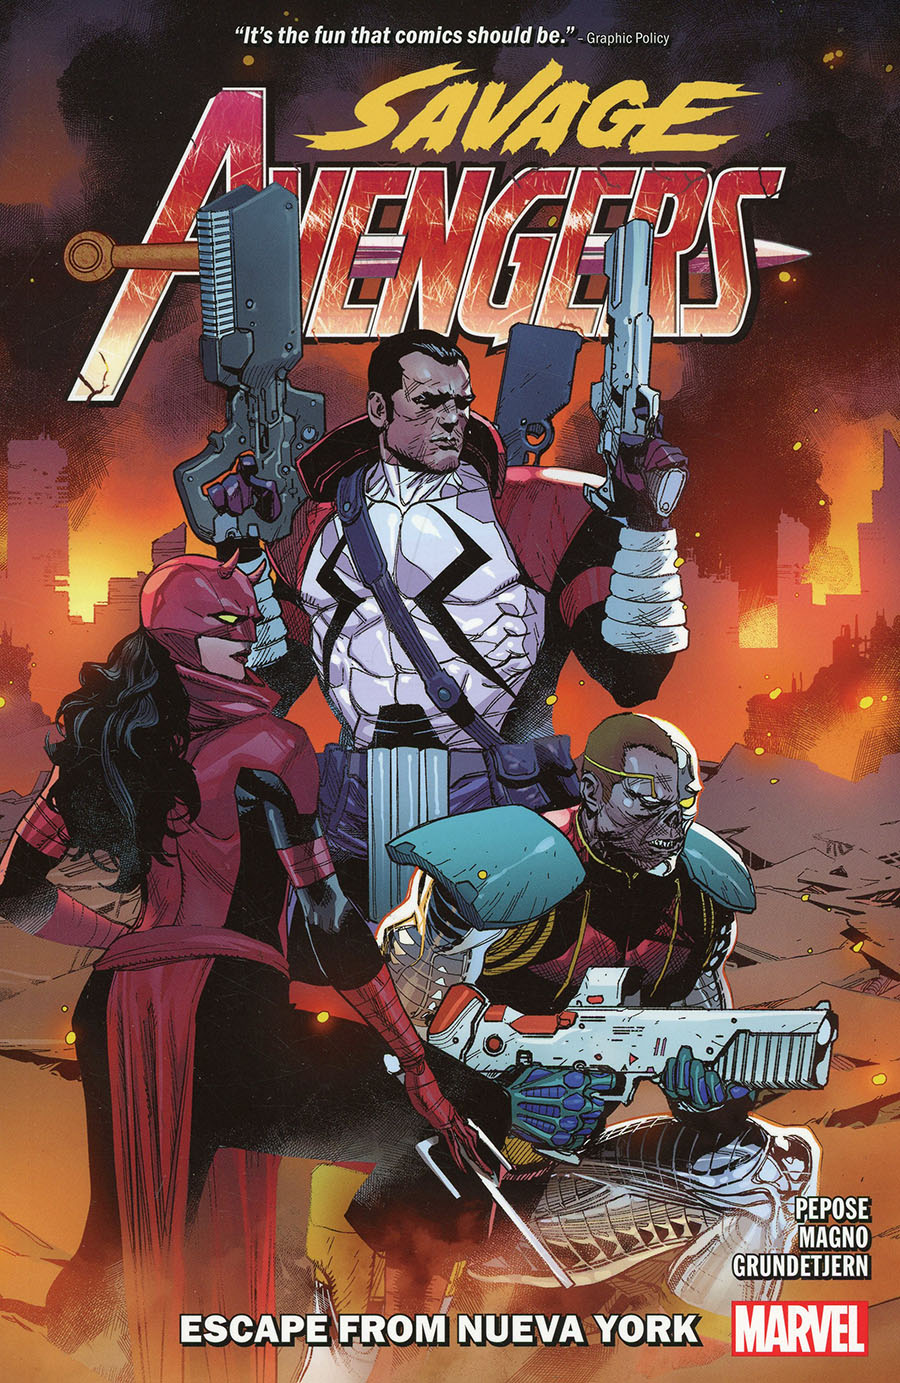 Savage Avengers (2022) Vol 2 Escape From Nueva York TP